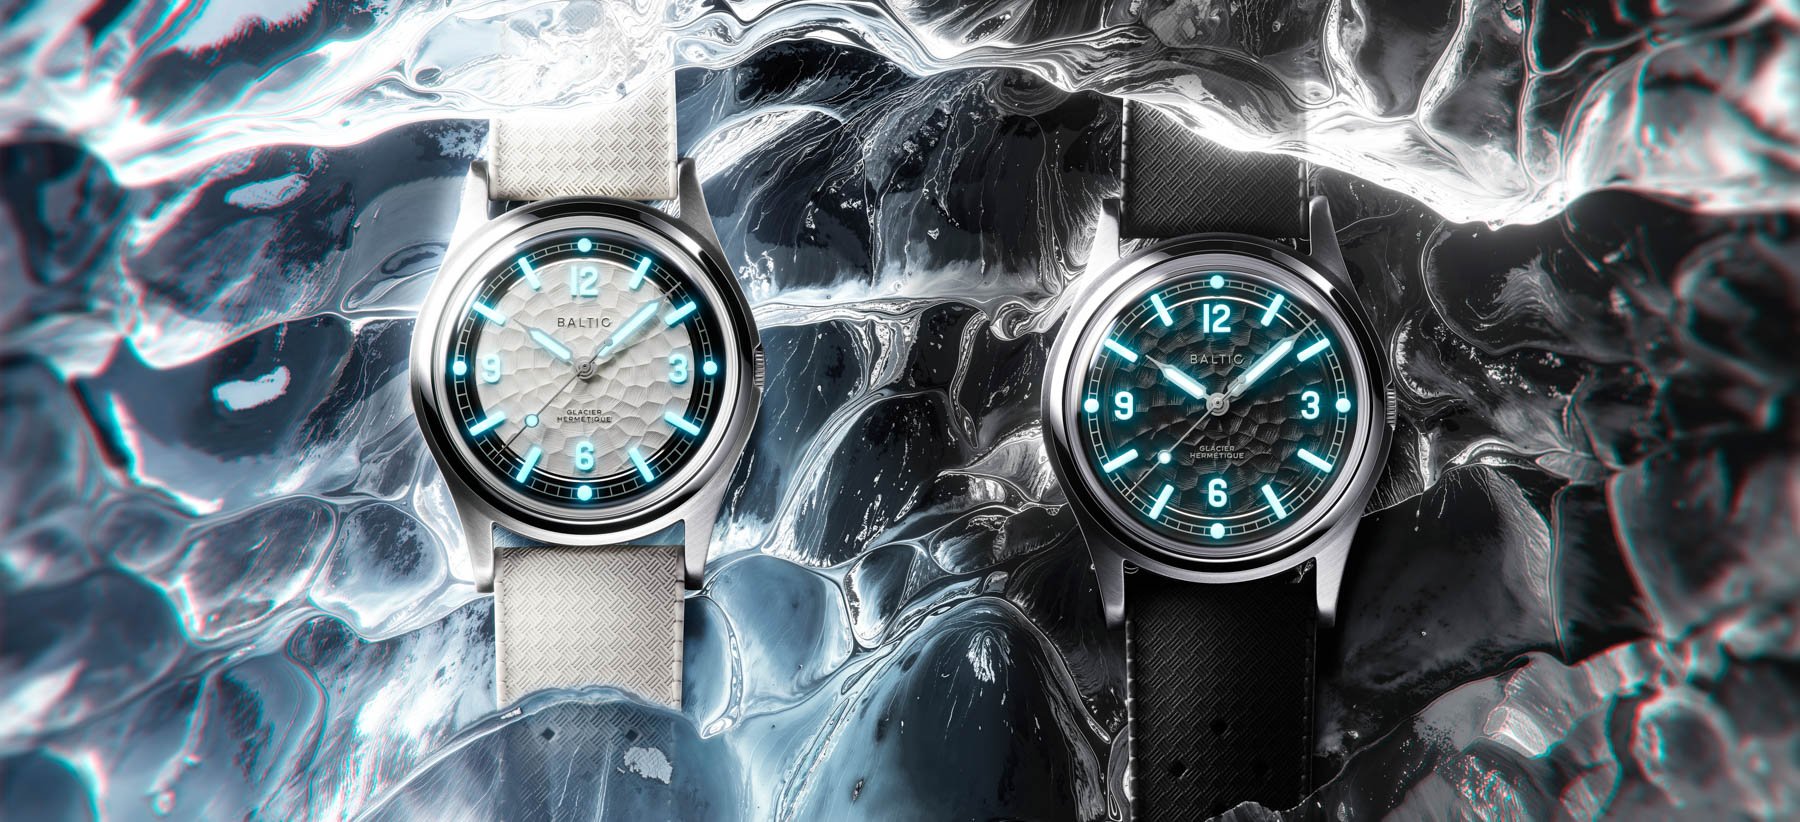 Introducing The Baltic Hermétique Glacier Limited Edition In Black And White